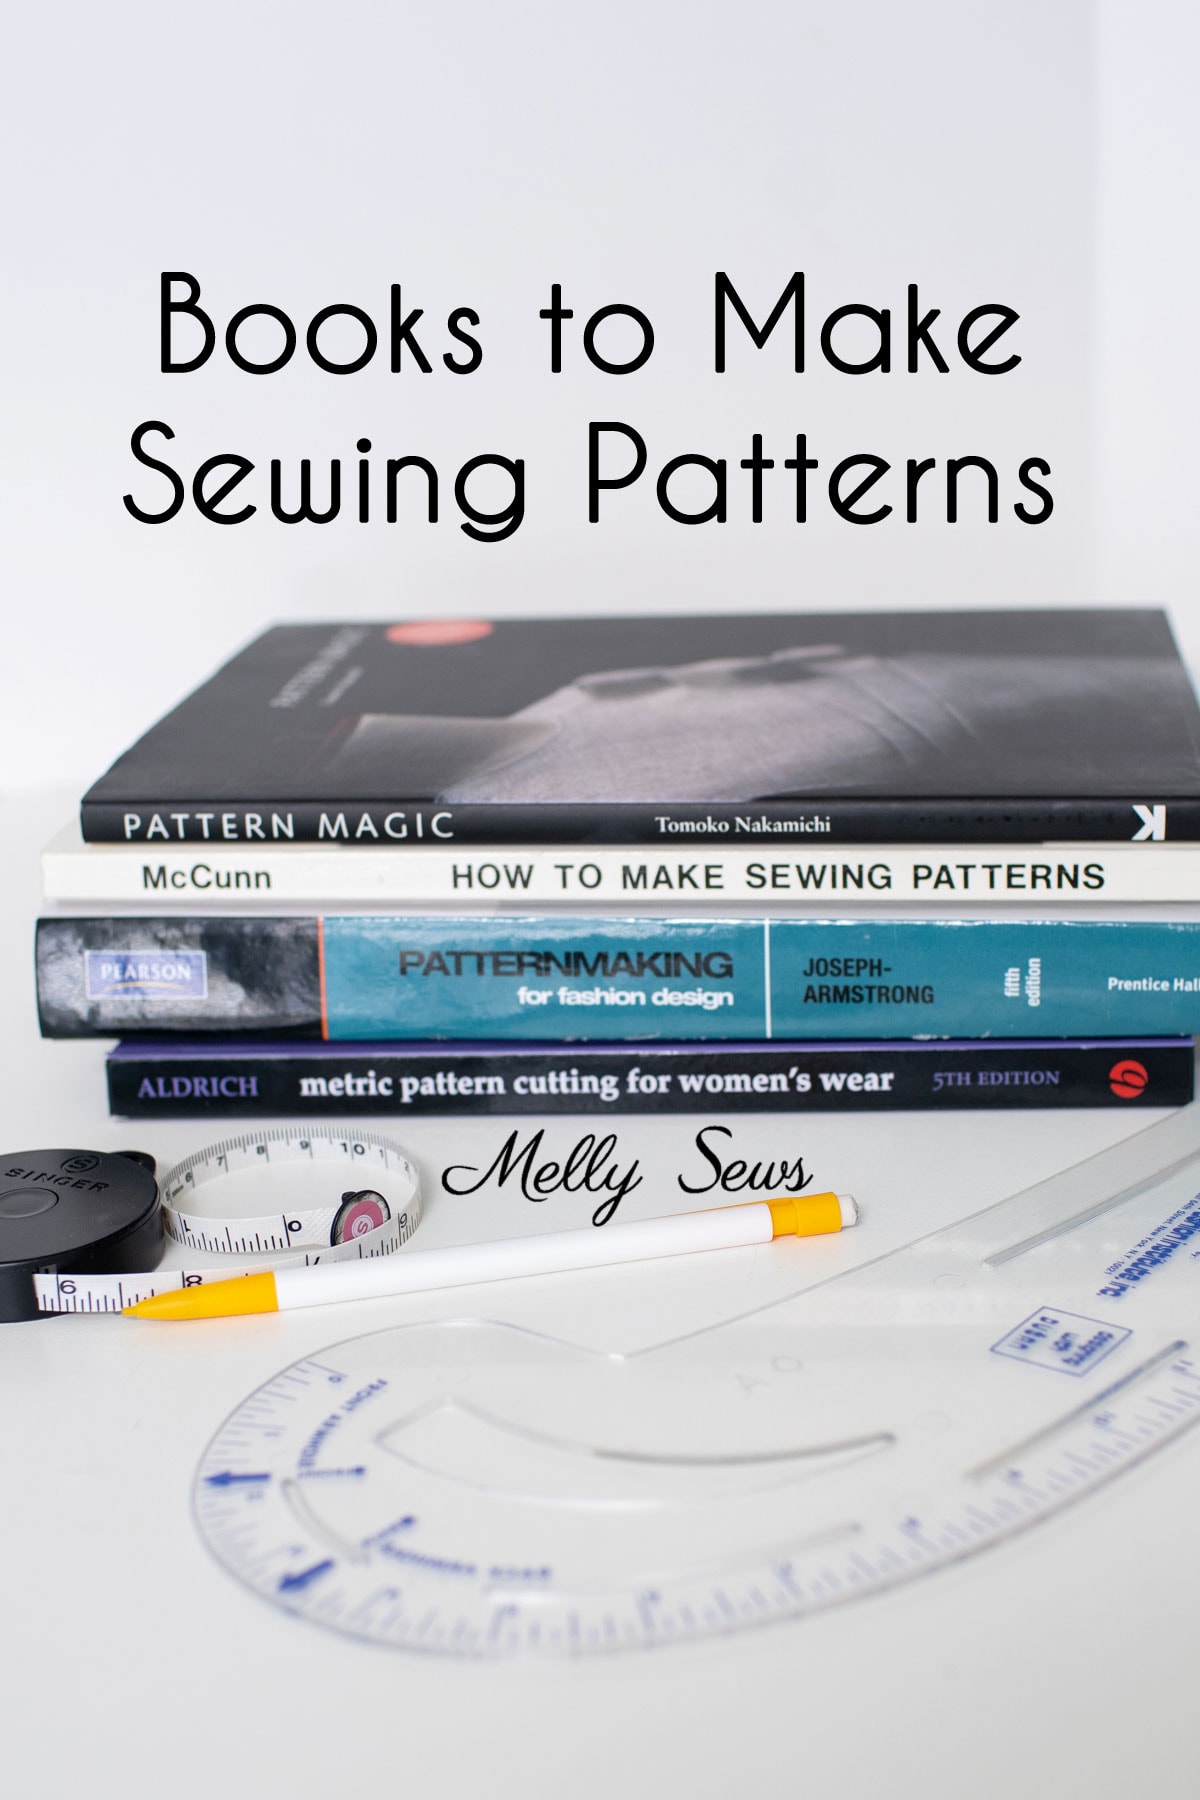 5 Sewing Notions to Make Your Life Easier - Melly Sews